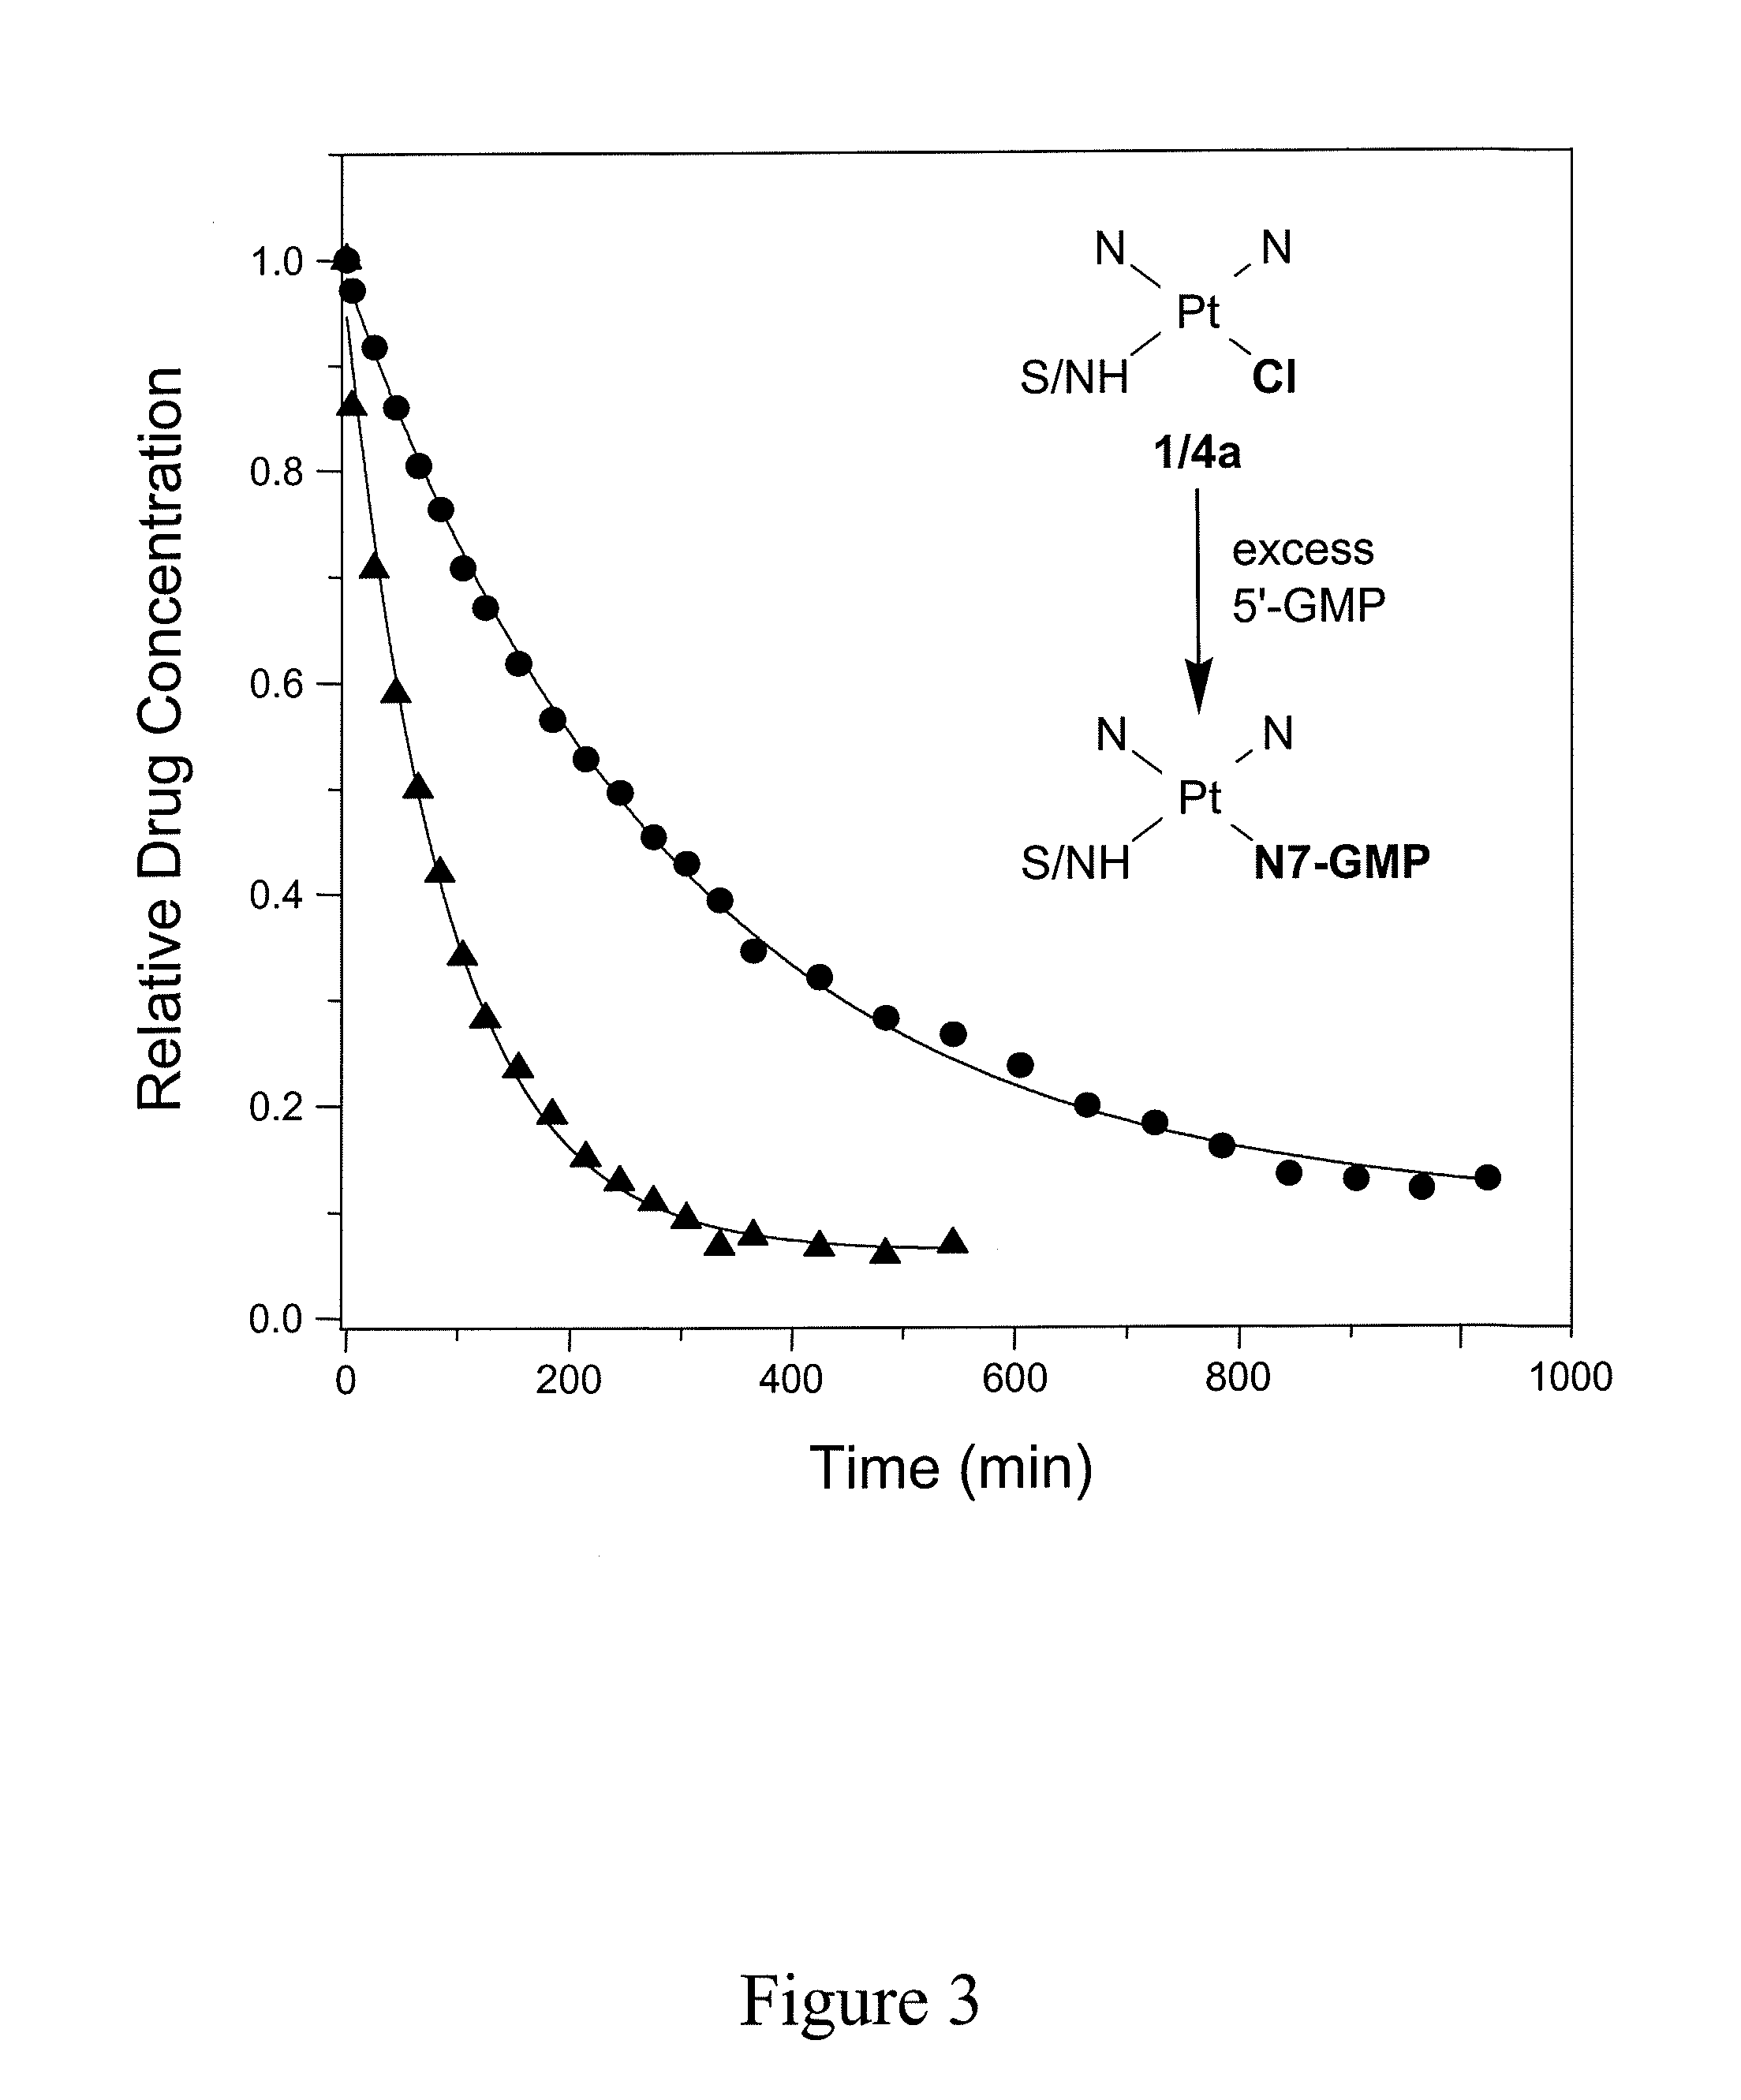 Platinum acridine anti-cancer compounds and methods thereof